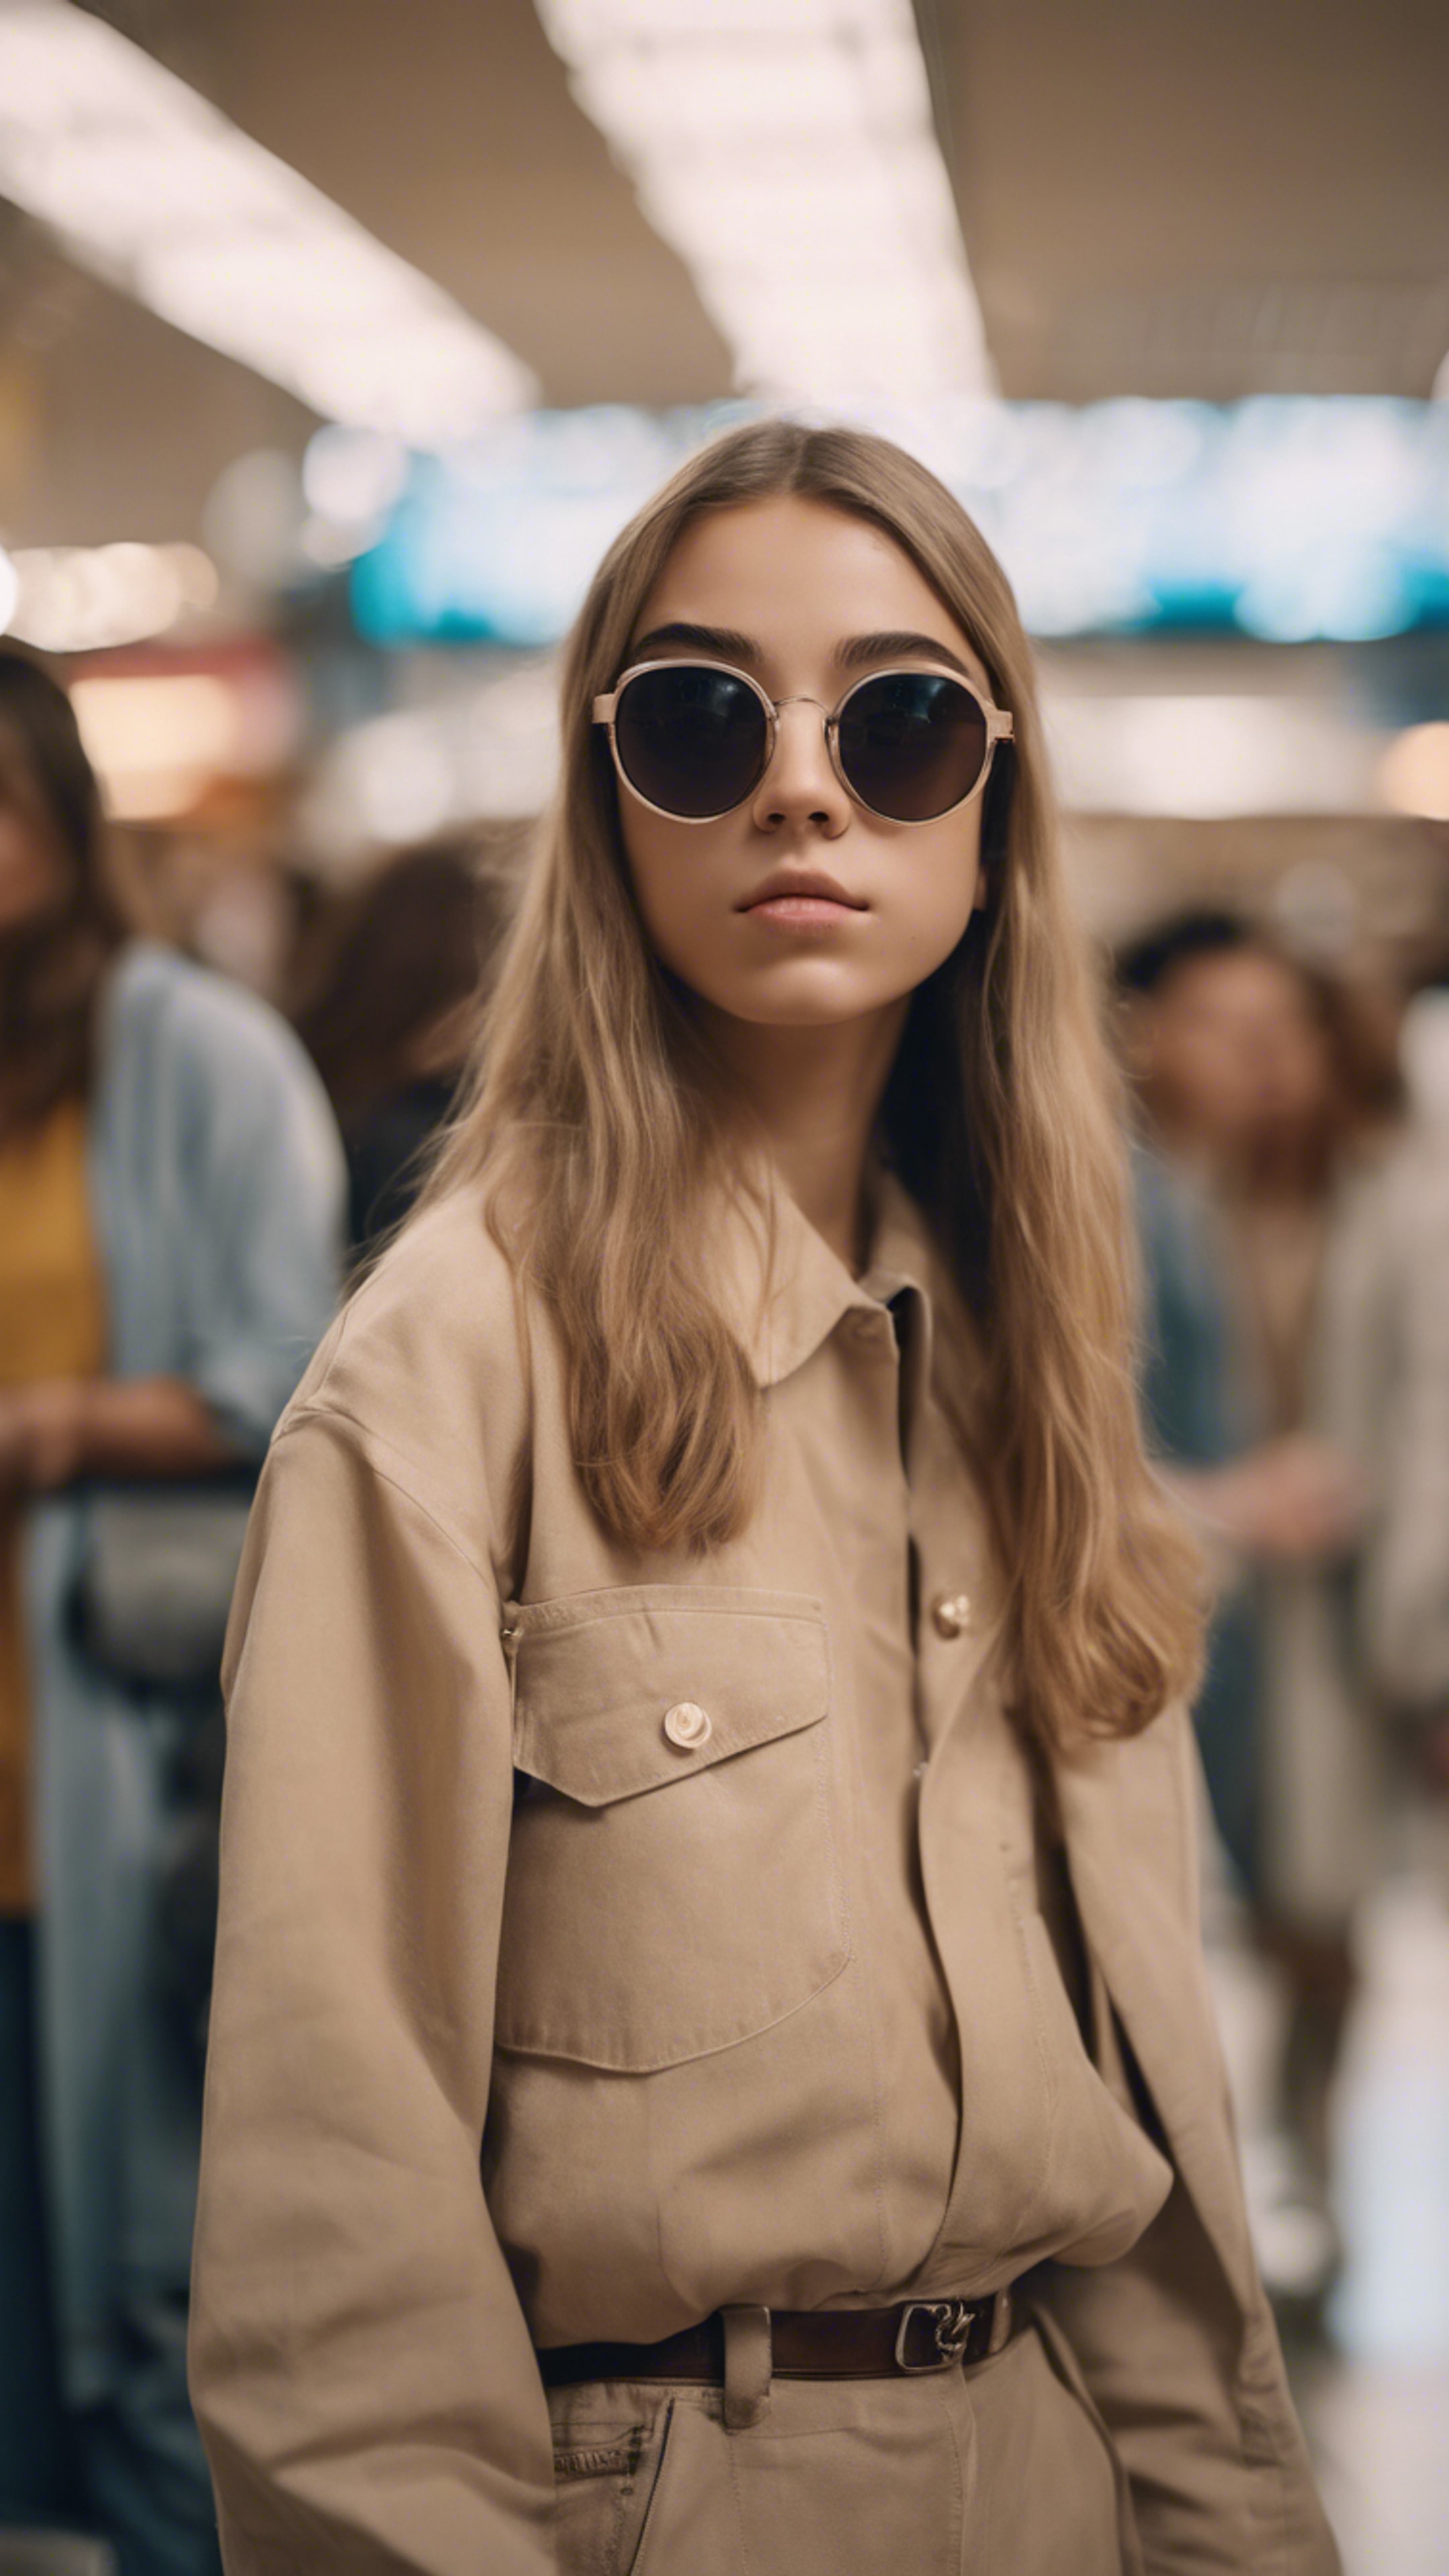 A teenage girl wearing oversized beige Y2K sunglasses in a crowded shopping mall. Tapetai[de9d60706497471bab6a]